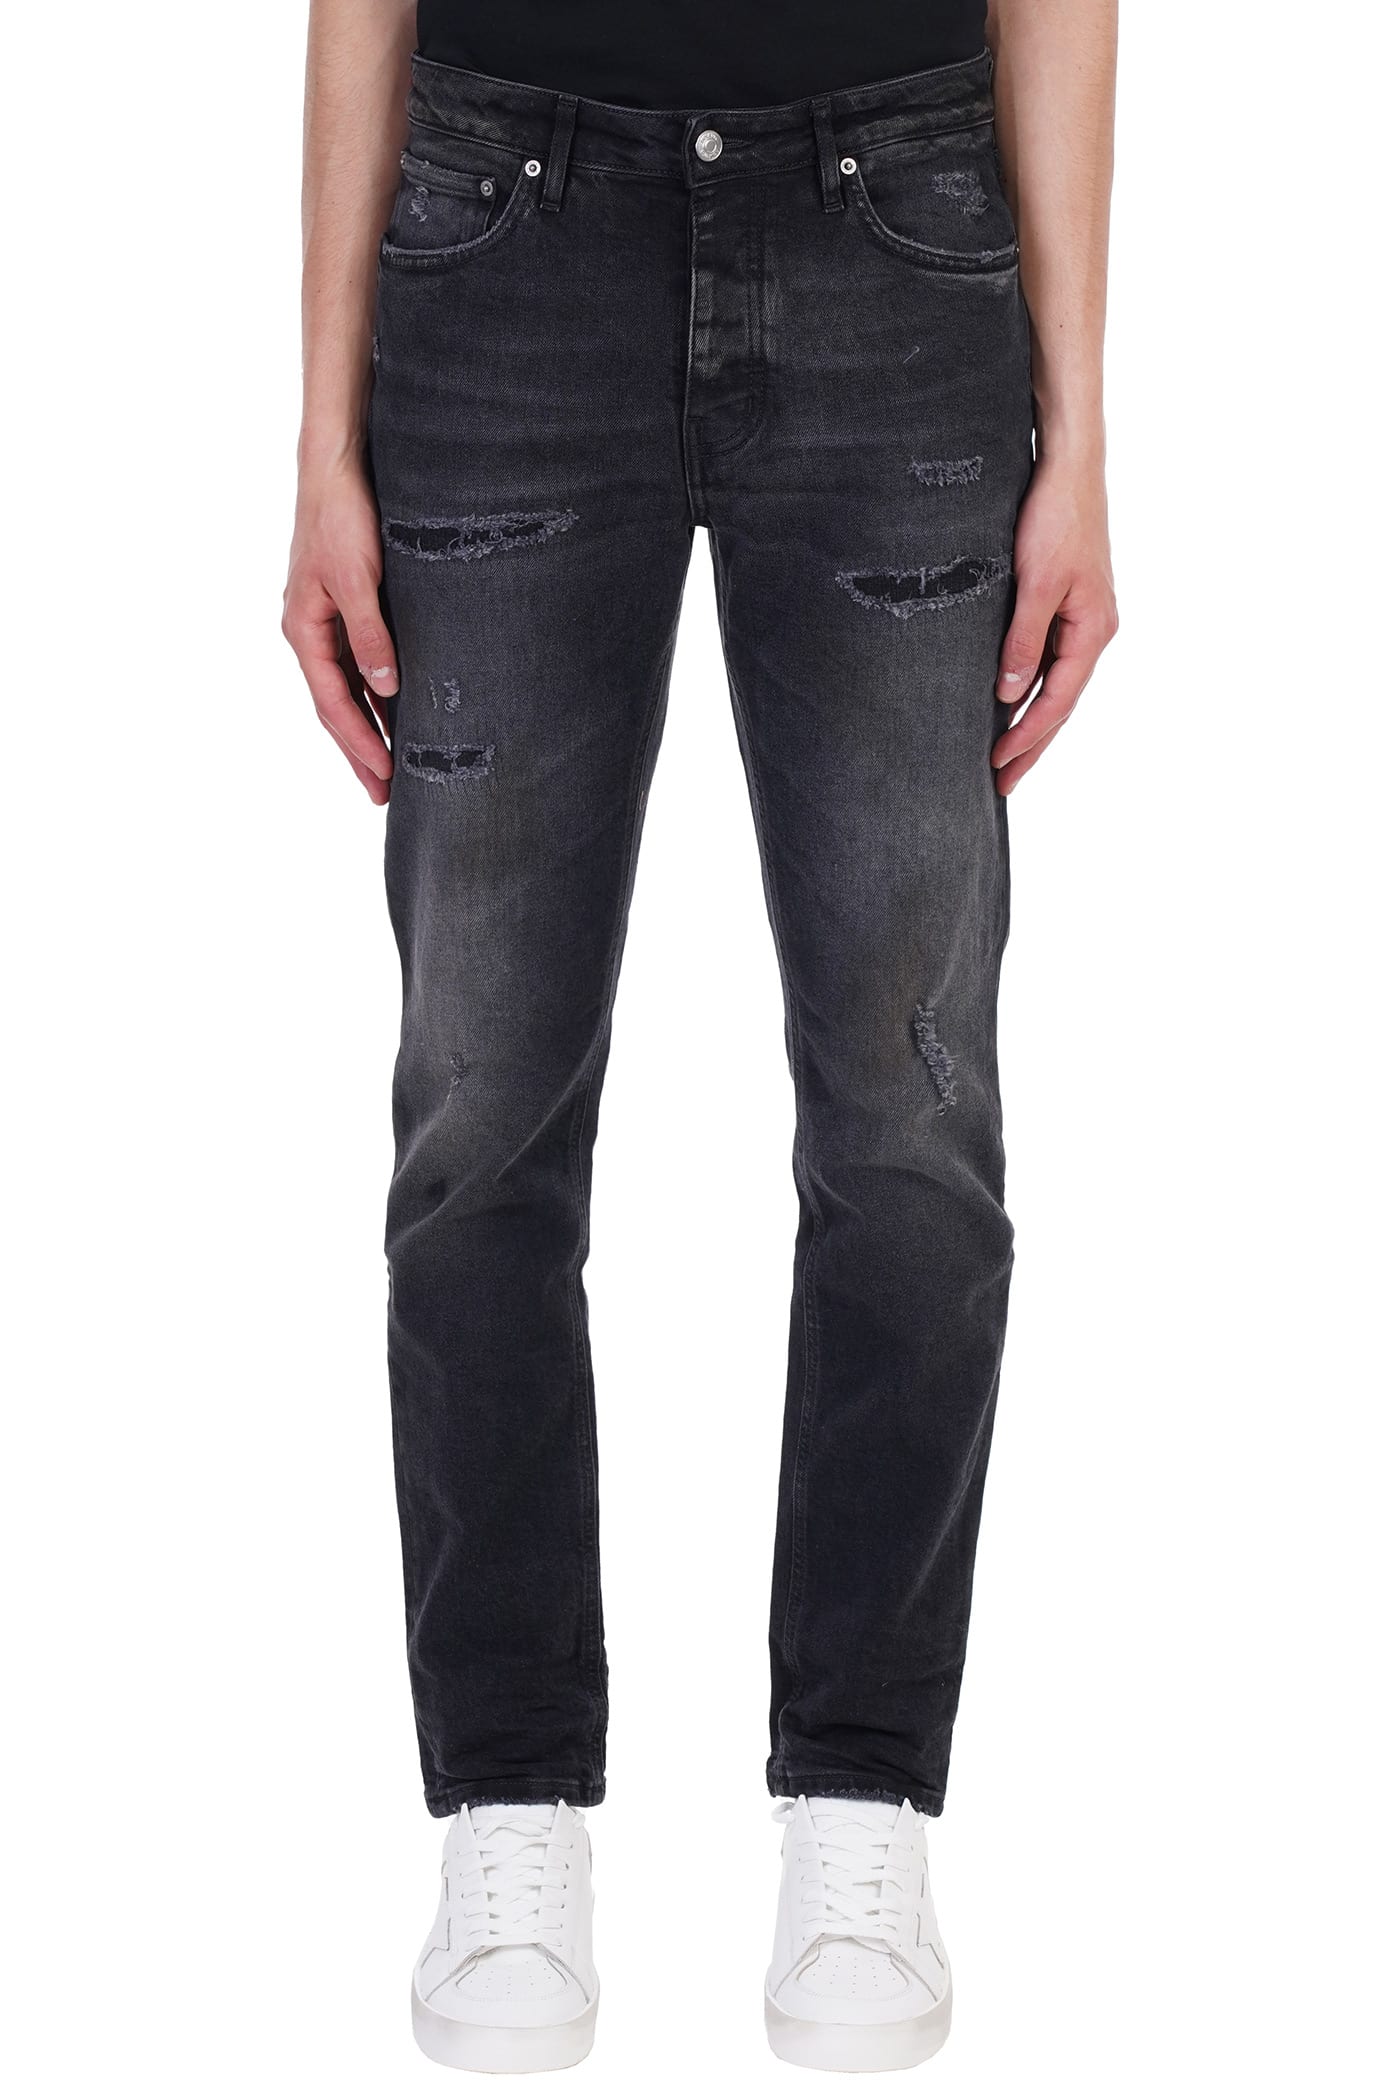 Haikure Cleveland Jeans In Black Cotton